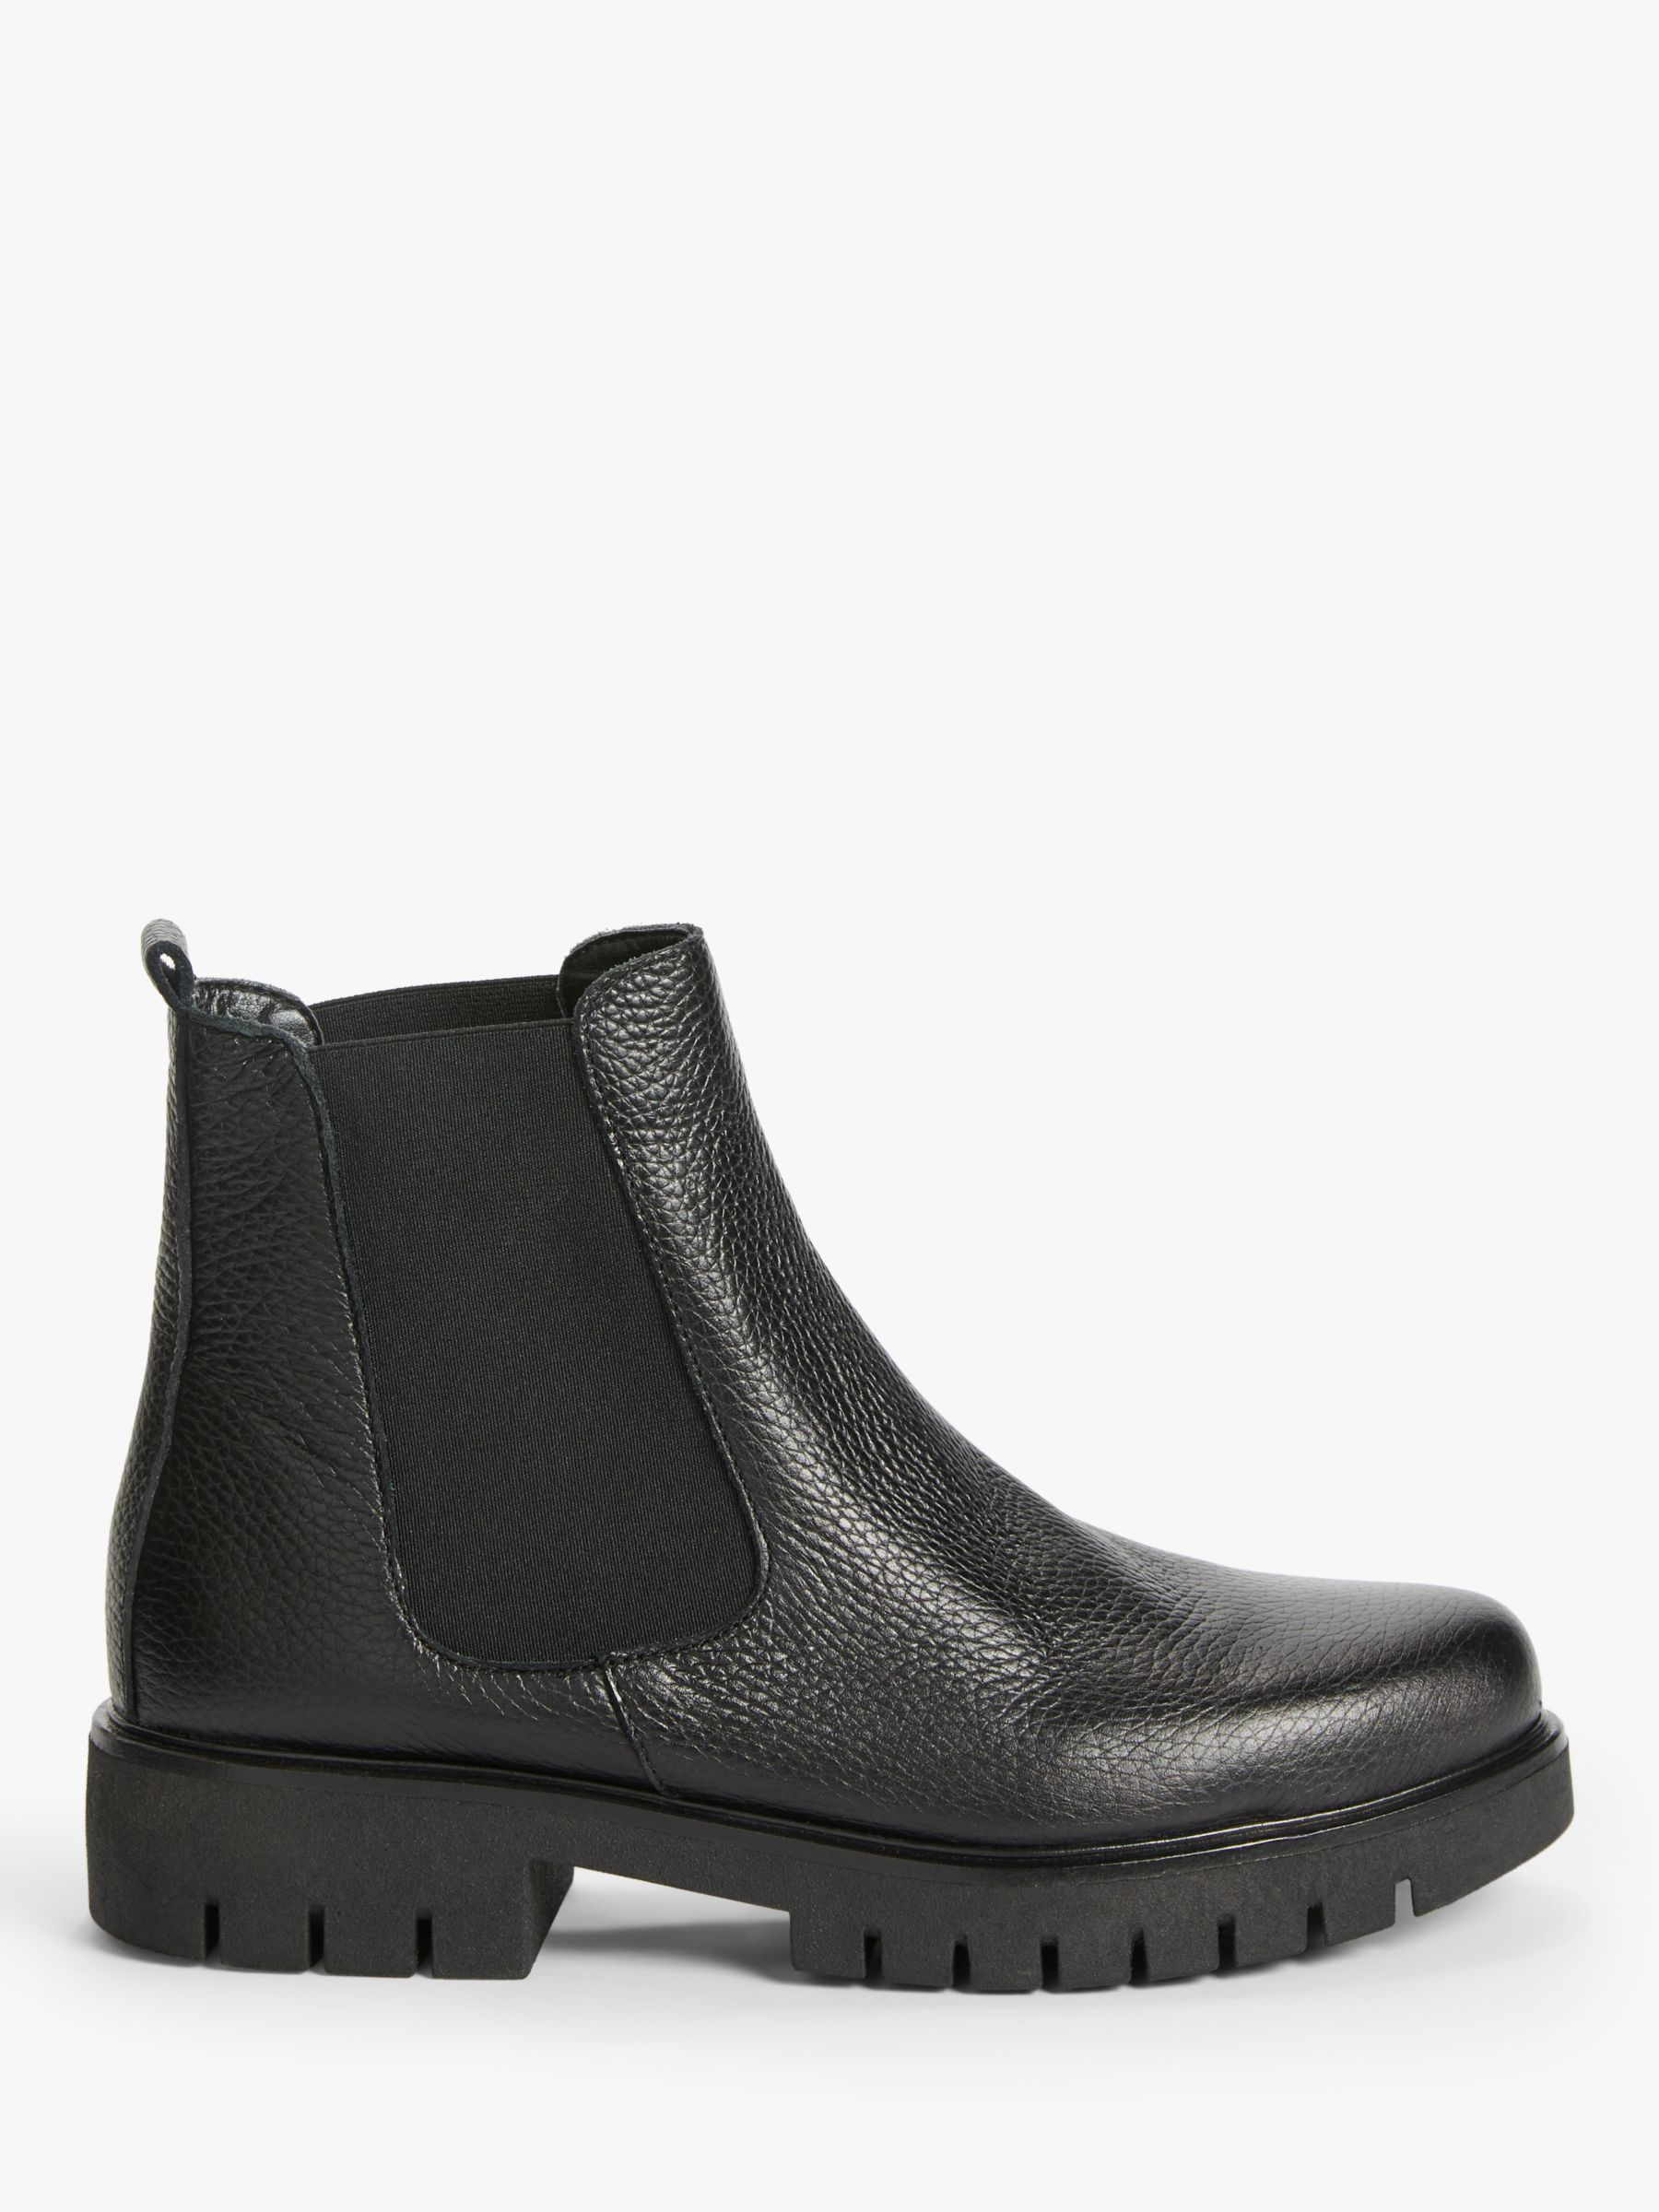 John Lewis Designed for Comfort Parma Leather Chelsea Boots, Black at ...